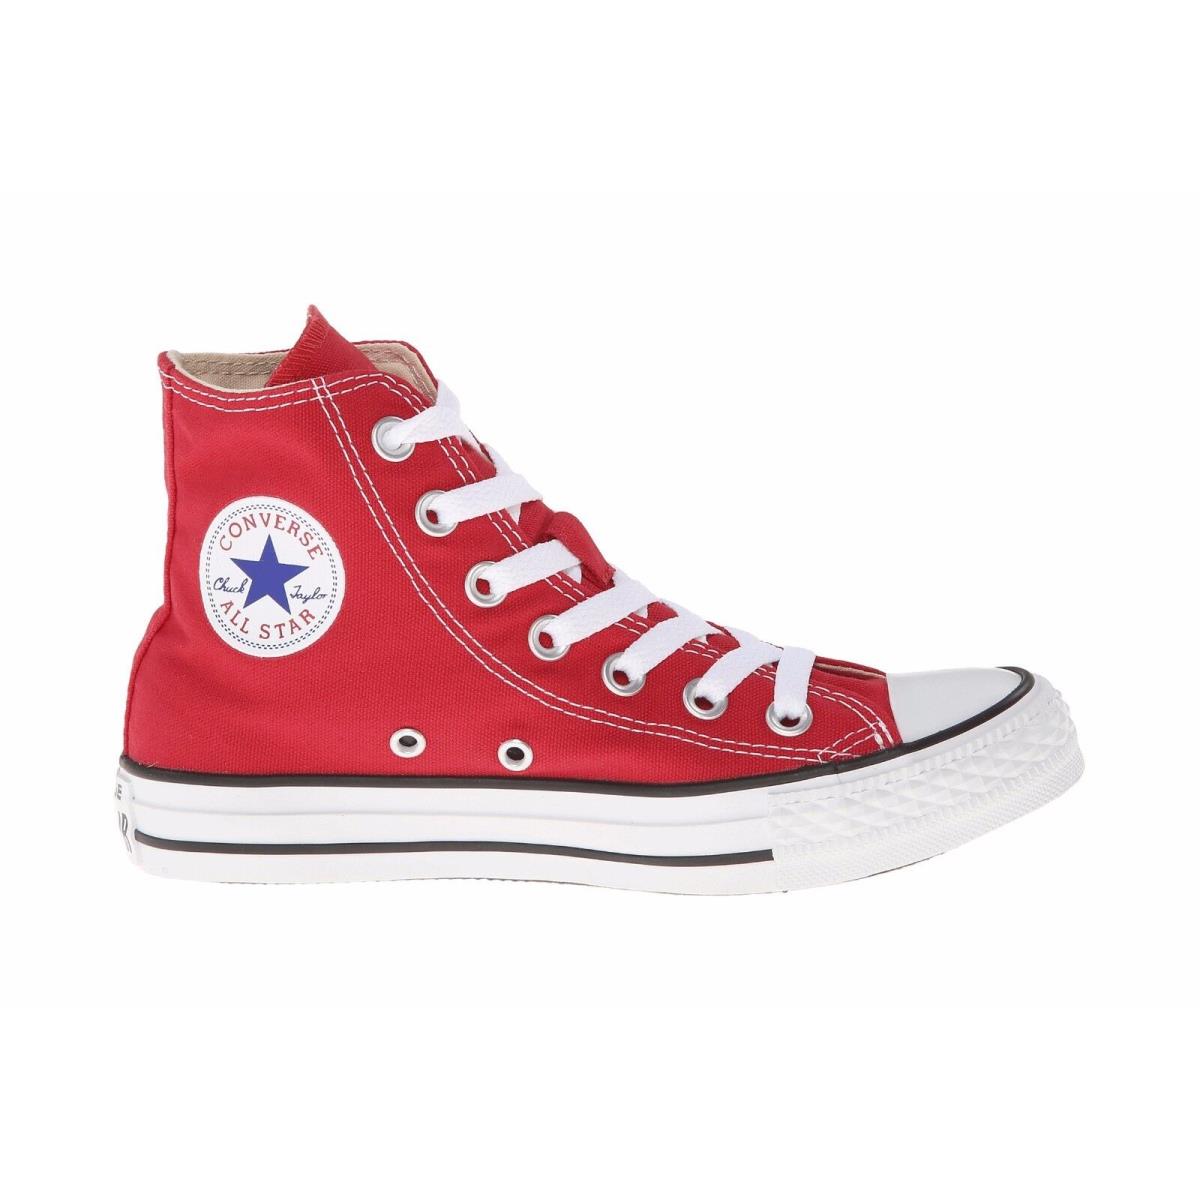 Converse Sneakers All Star Chuck Taylor Men Size Red Hi Top Canvas Shoes M9621 - Red